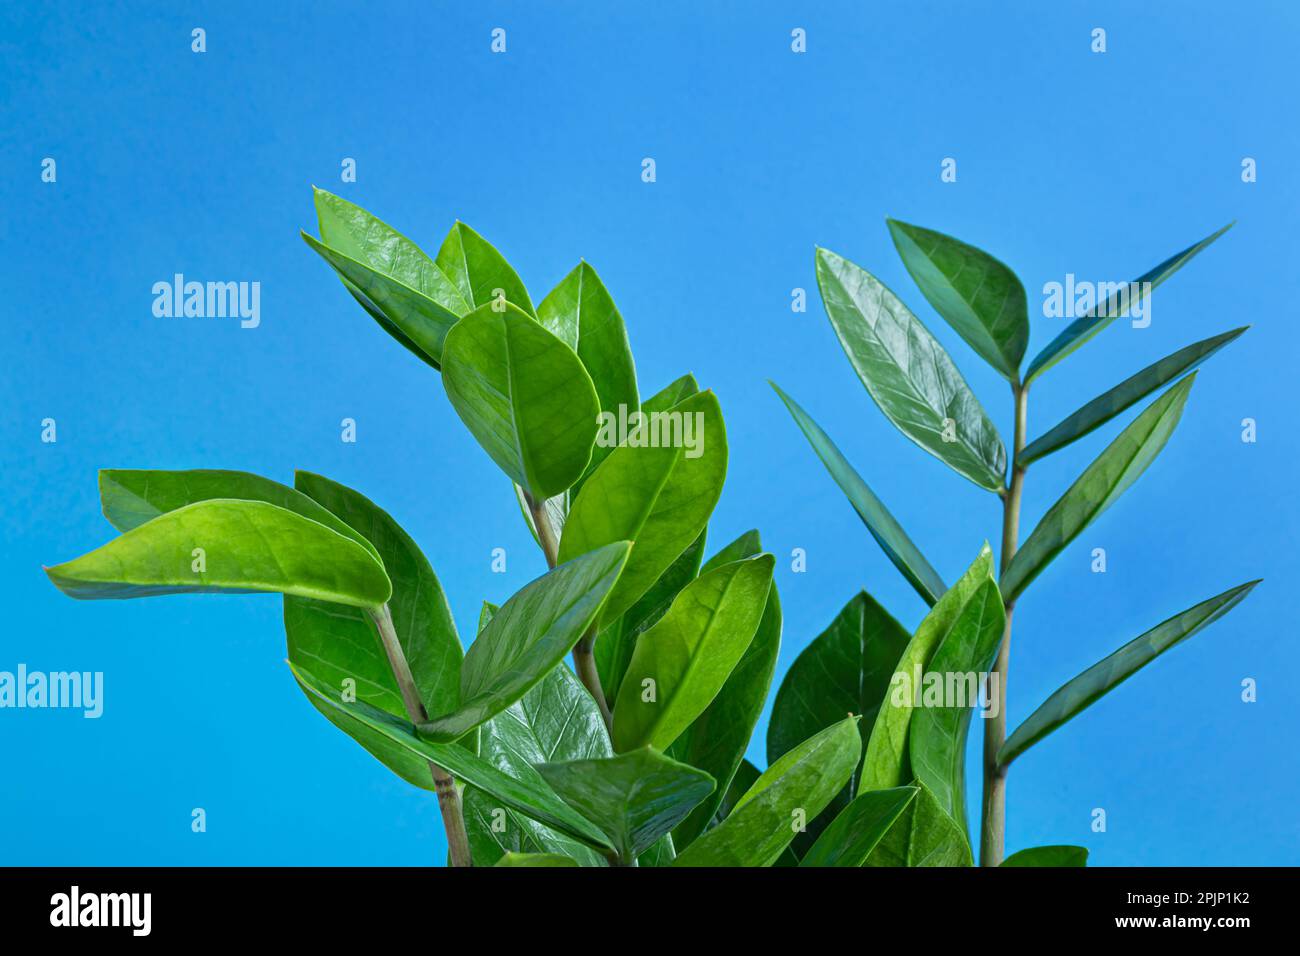 Green branches of Zamioculcas, or zamiifolia zz plant close-up on a blue background, home gardening and connecting with nature concept Stock Photo